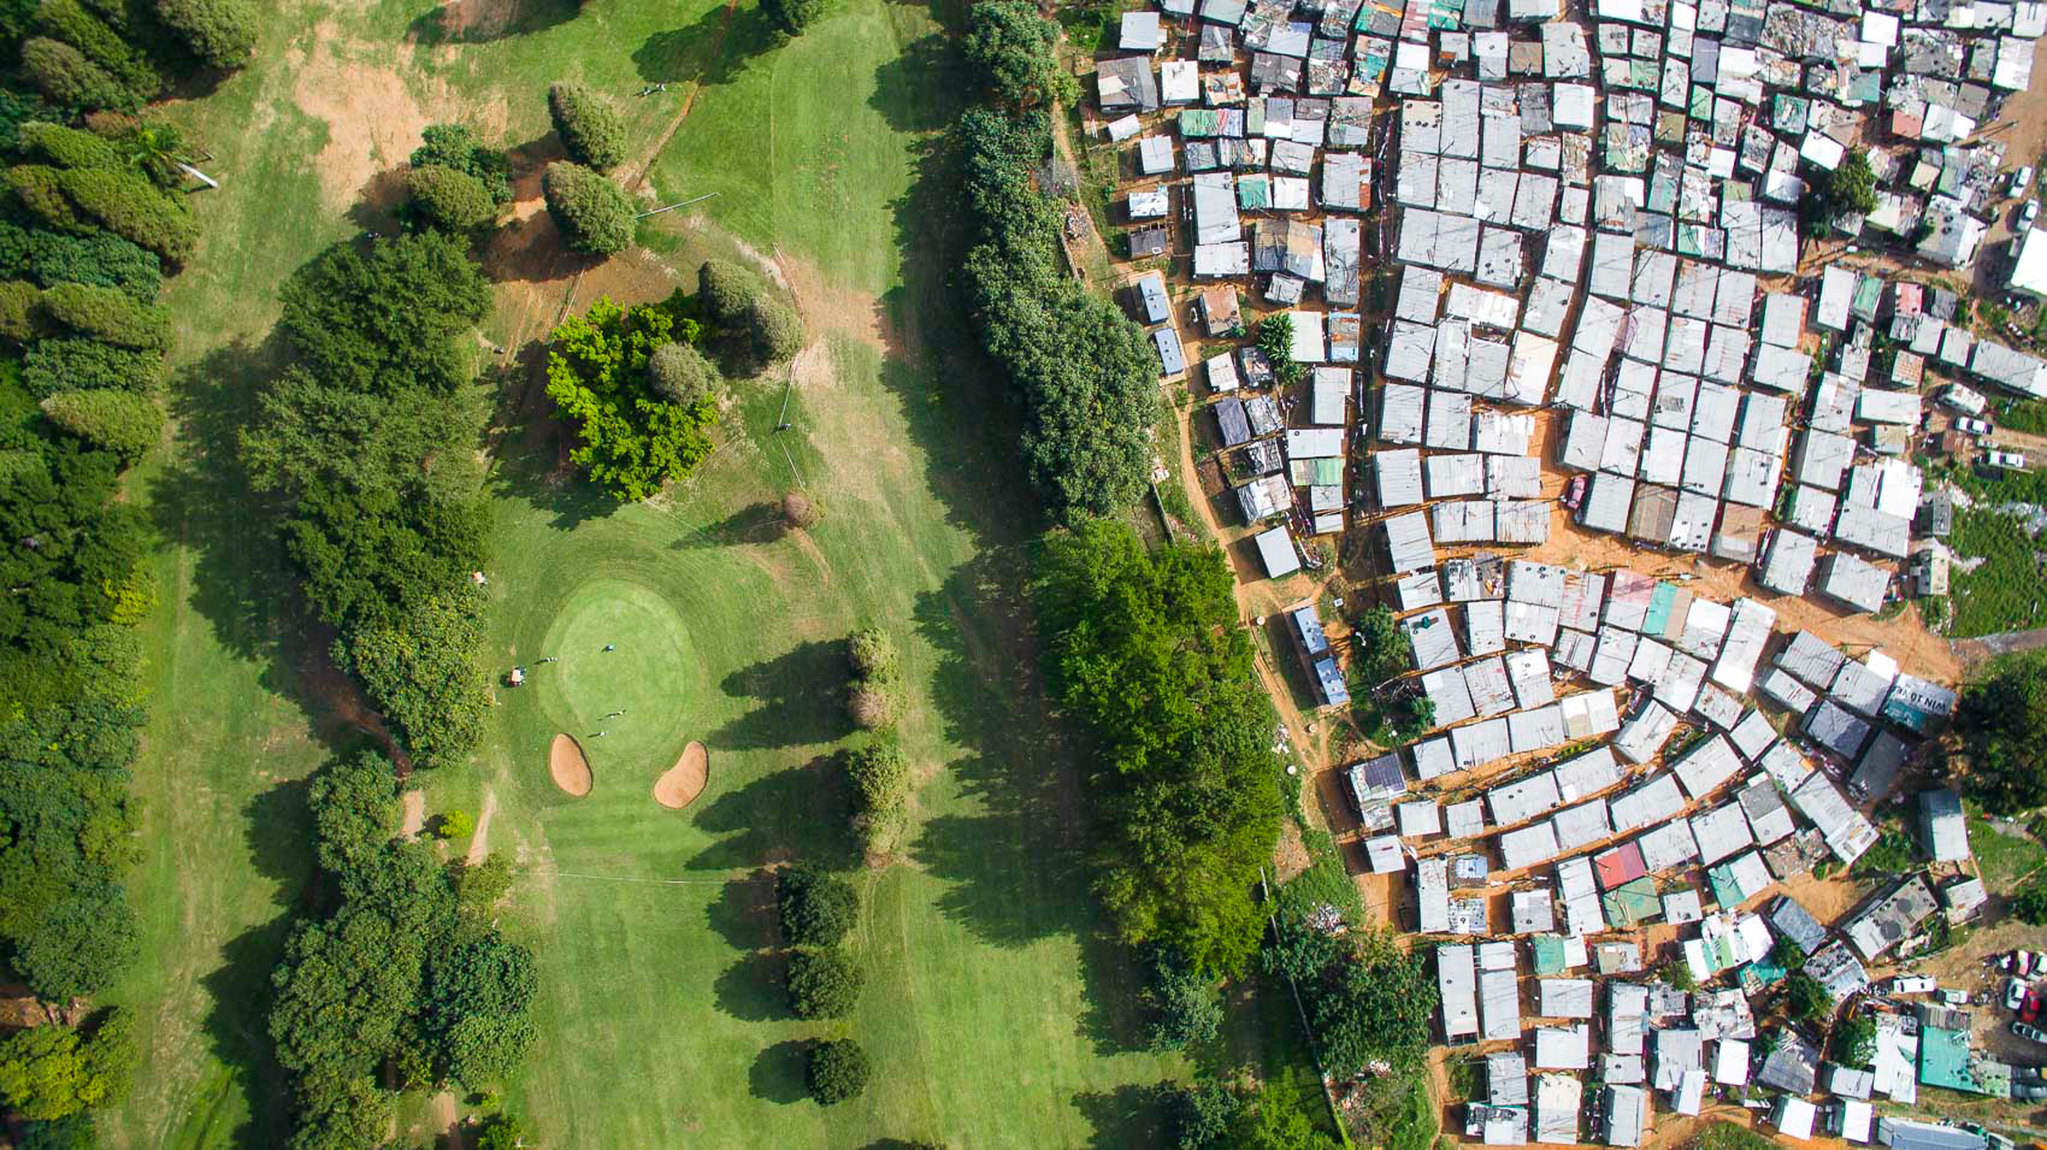 Papwa Sewgolum Golf Course is located along the lush green slopes of the Umgeni River in Durban. Almost unbelievably, a sprawling informal settlement exists just meters from the tee for the 6 hole. A low-slung concrete fence separates the tin shacks from the carefully manicured fairways. In a twist of irony, the golf course is named after an apartheid-era golfer of Indian descent, named Sewsunker “Papwa” Sewgolum. Papwa Sewgolum was an excellent self-taught golfer, with no formal schooling.